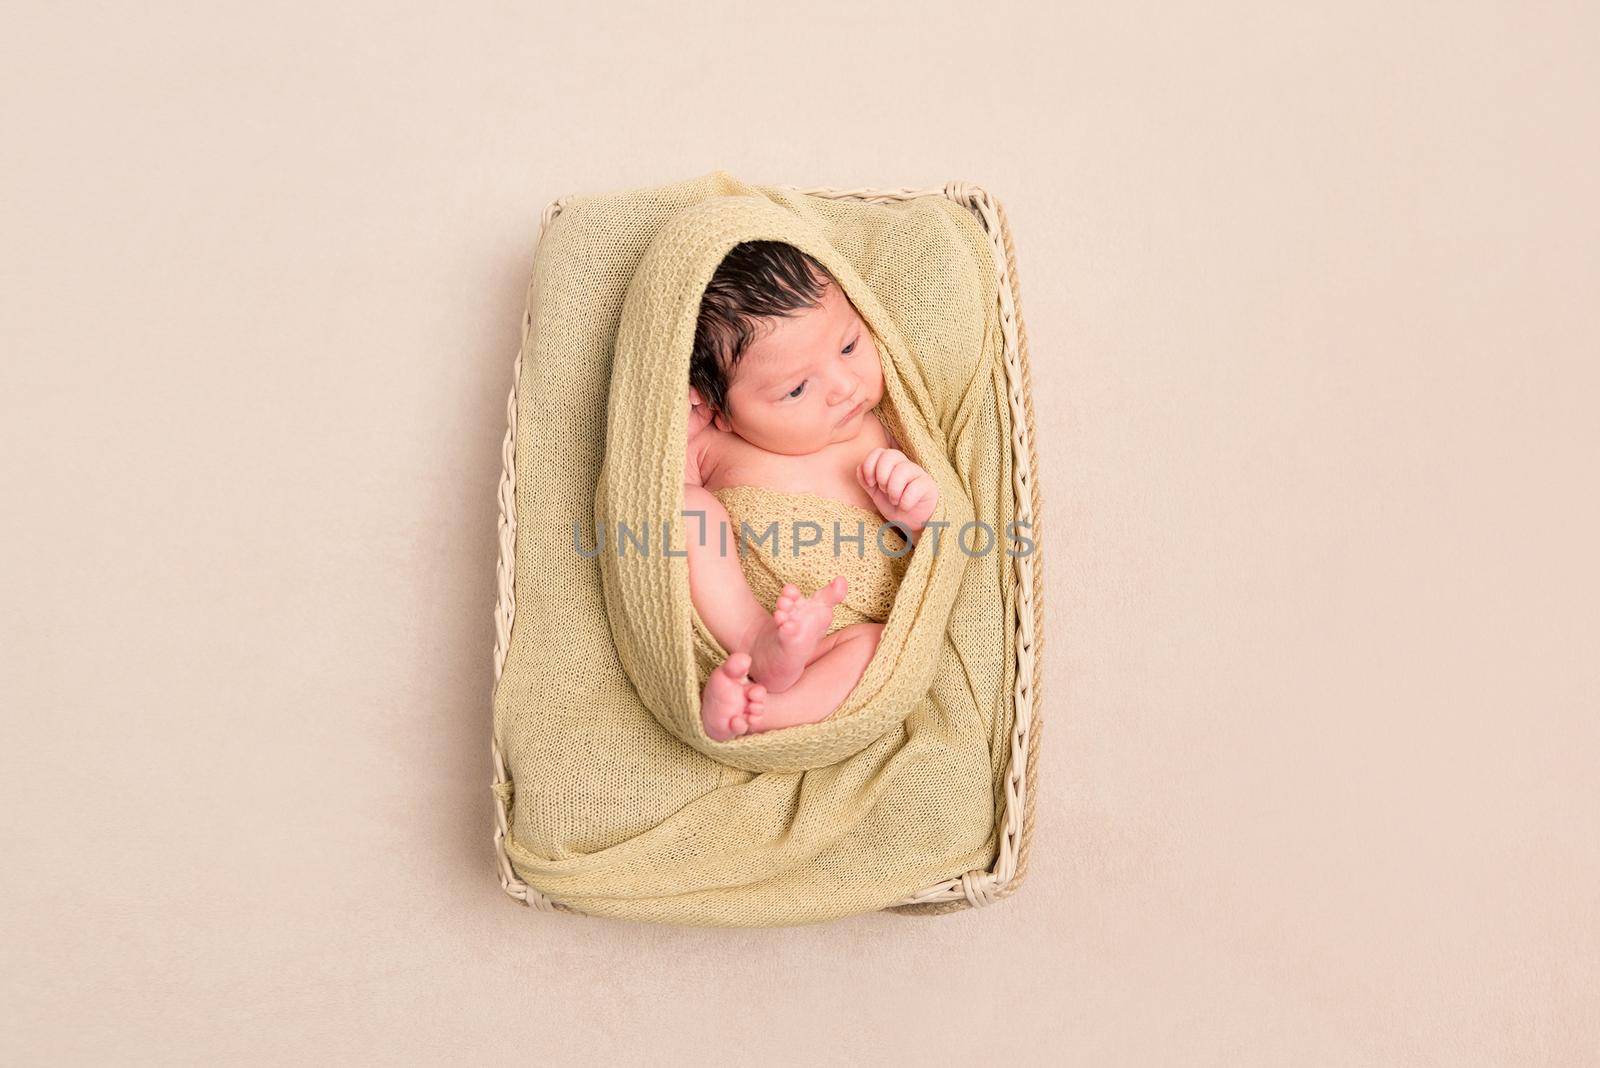 Wrapped black-haired baby basket, topview by tan4ikk1